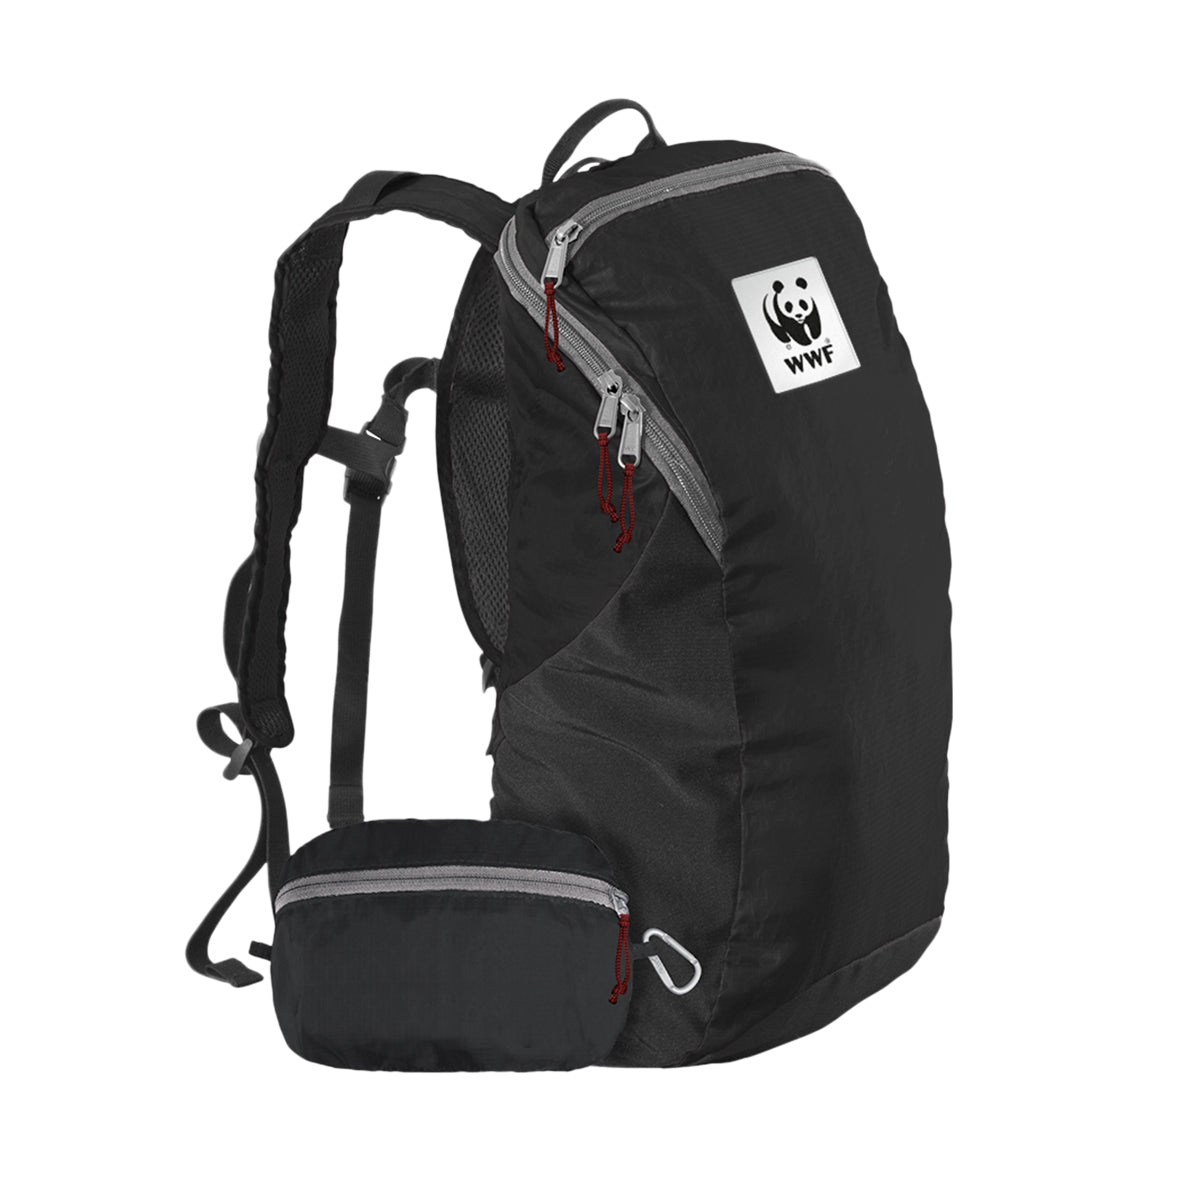 ChicoBag travel backpack - WWF-Canada